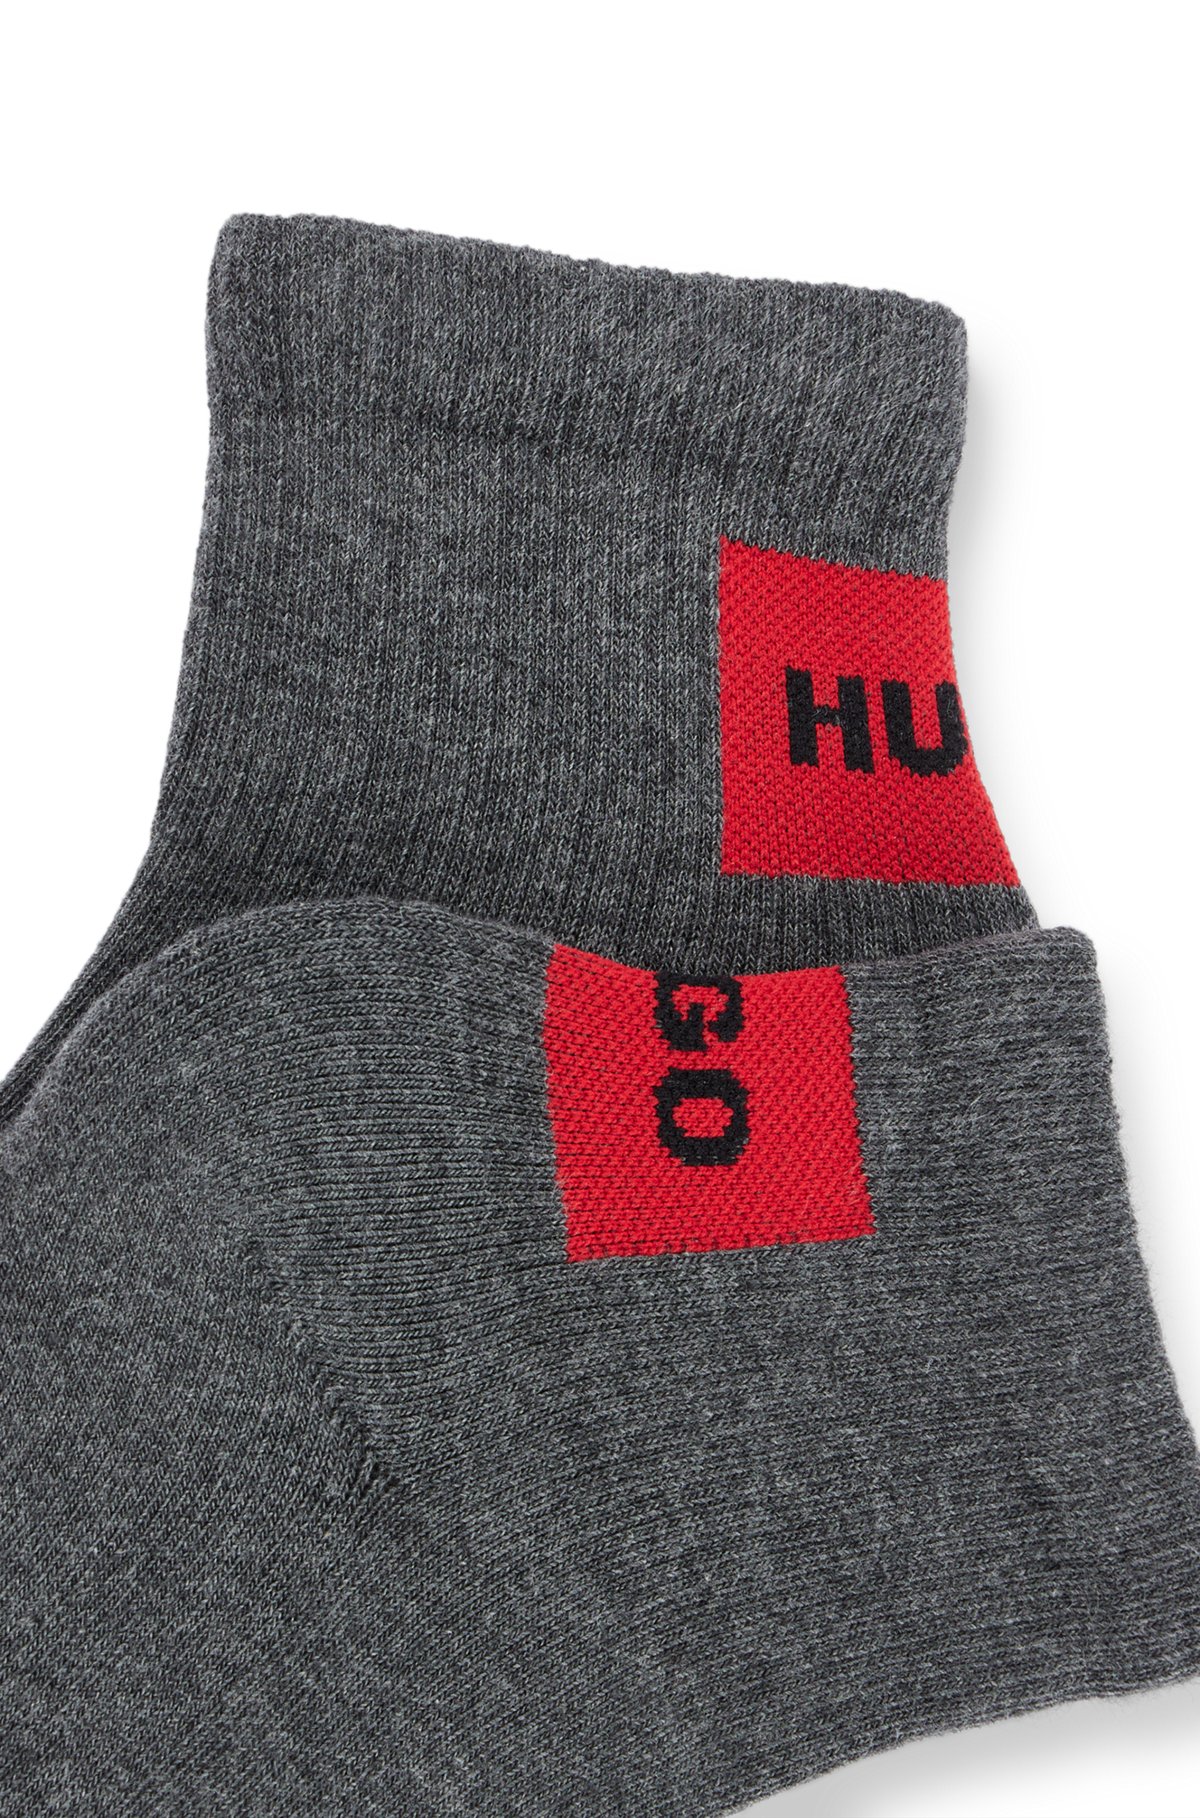 HUGO - Two-pack of short socks with red logo label